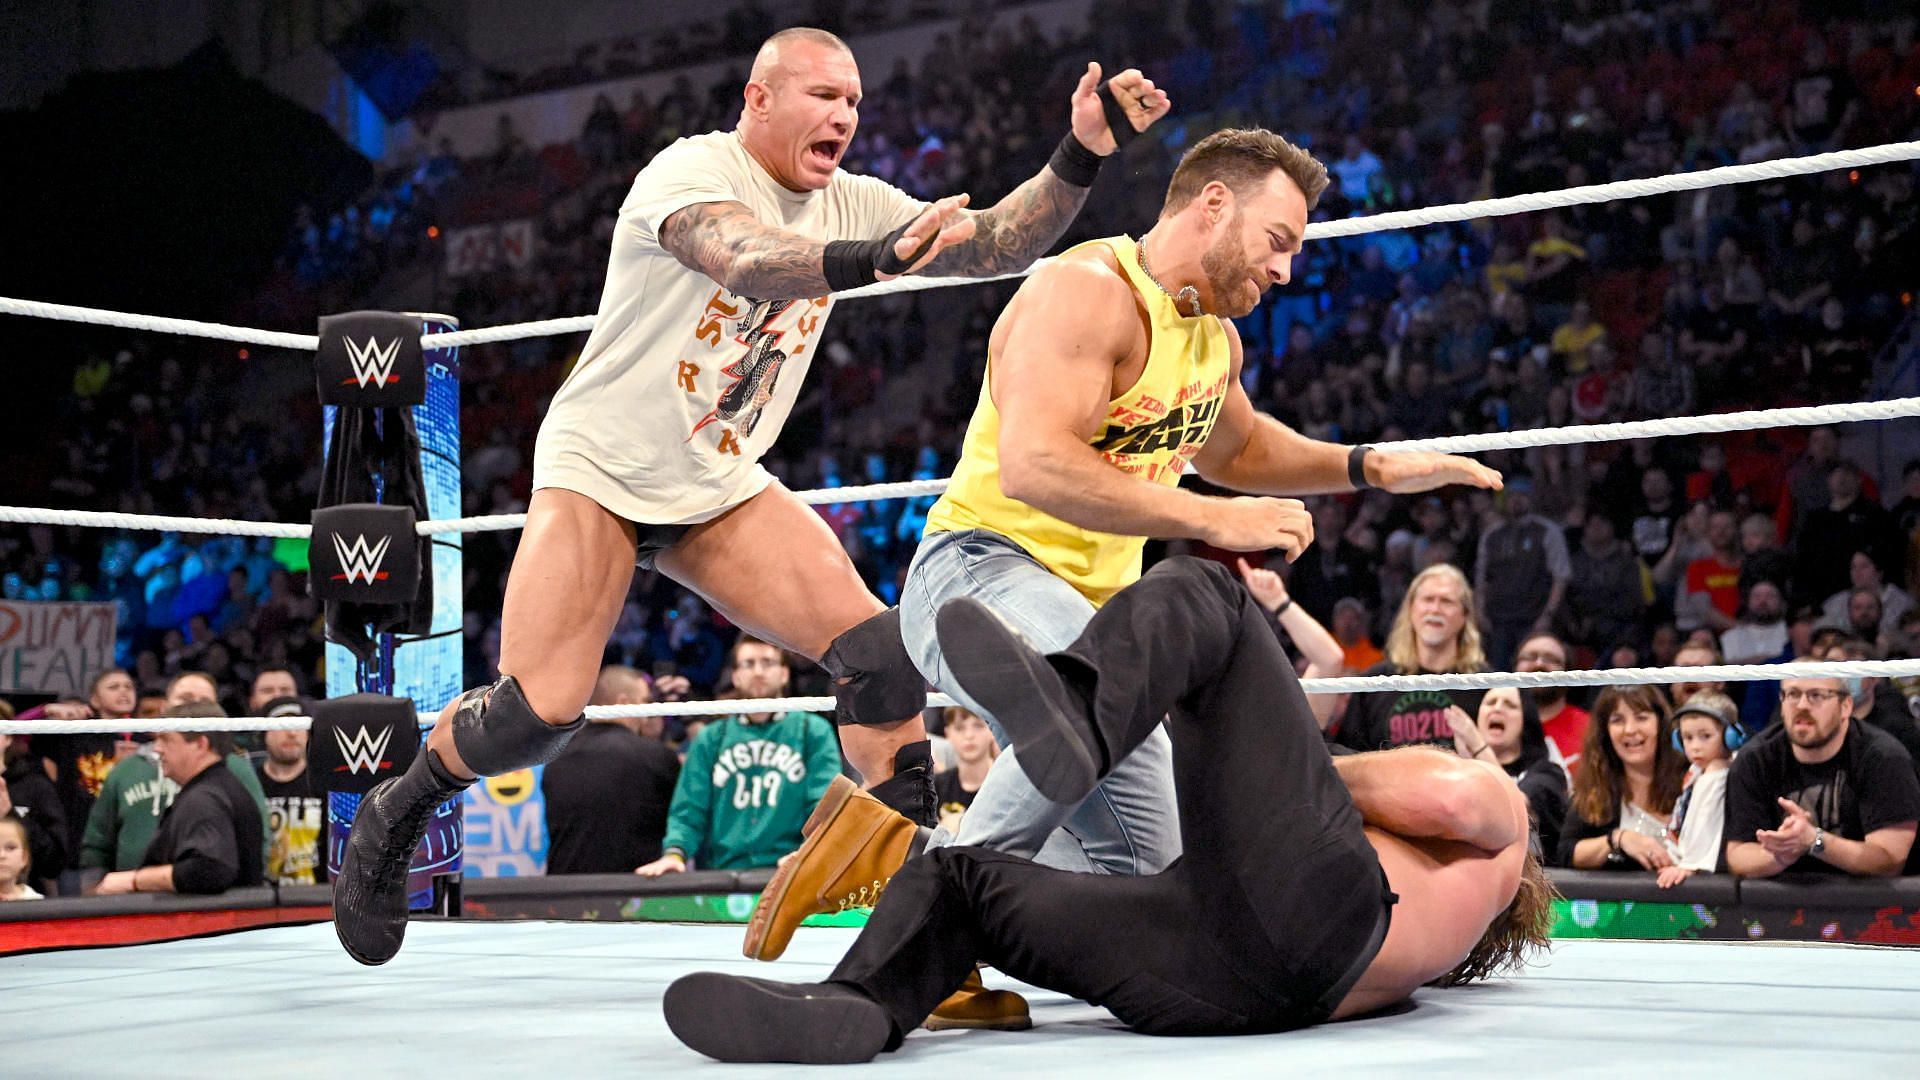 LA Knight, Randy Orton, and AJ Styles brawled at the end of SmackDown